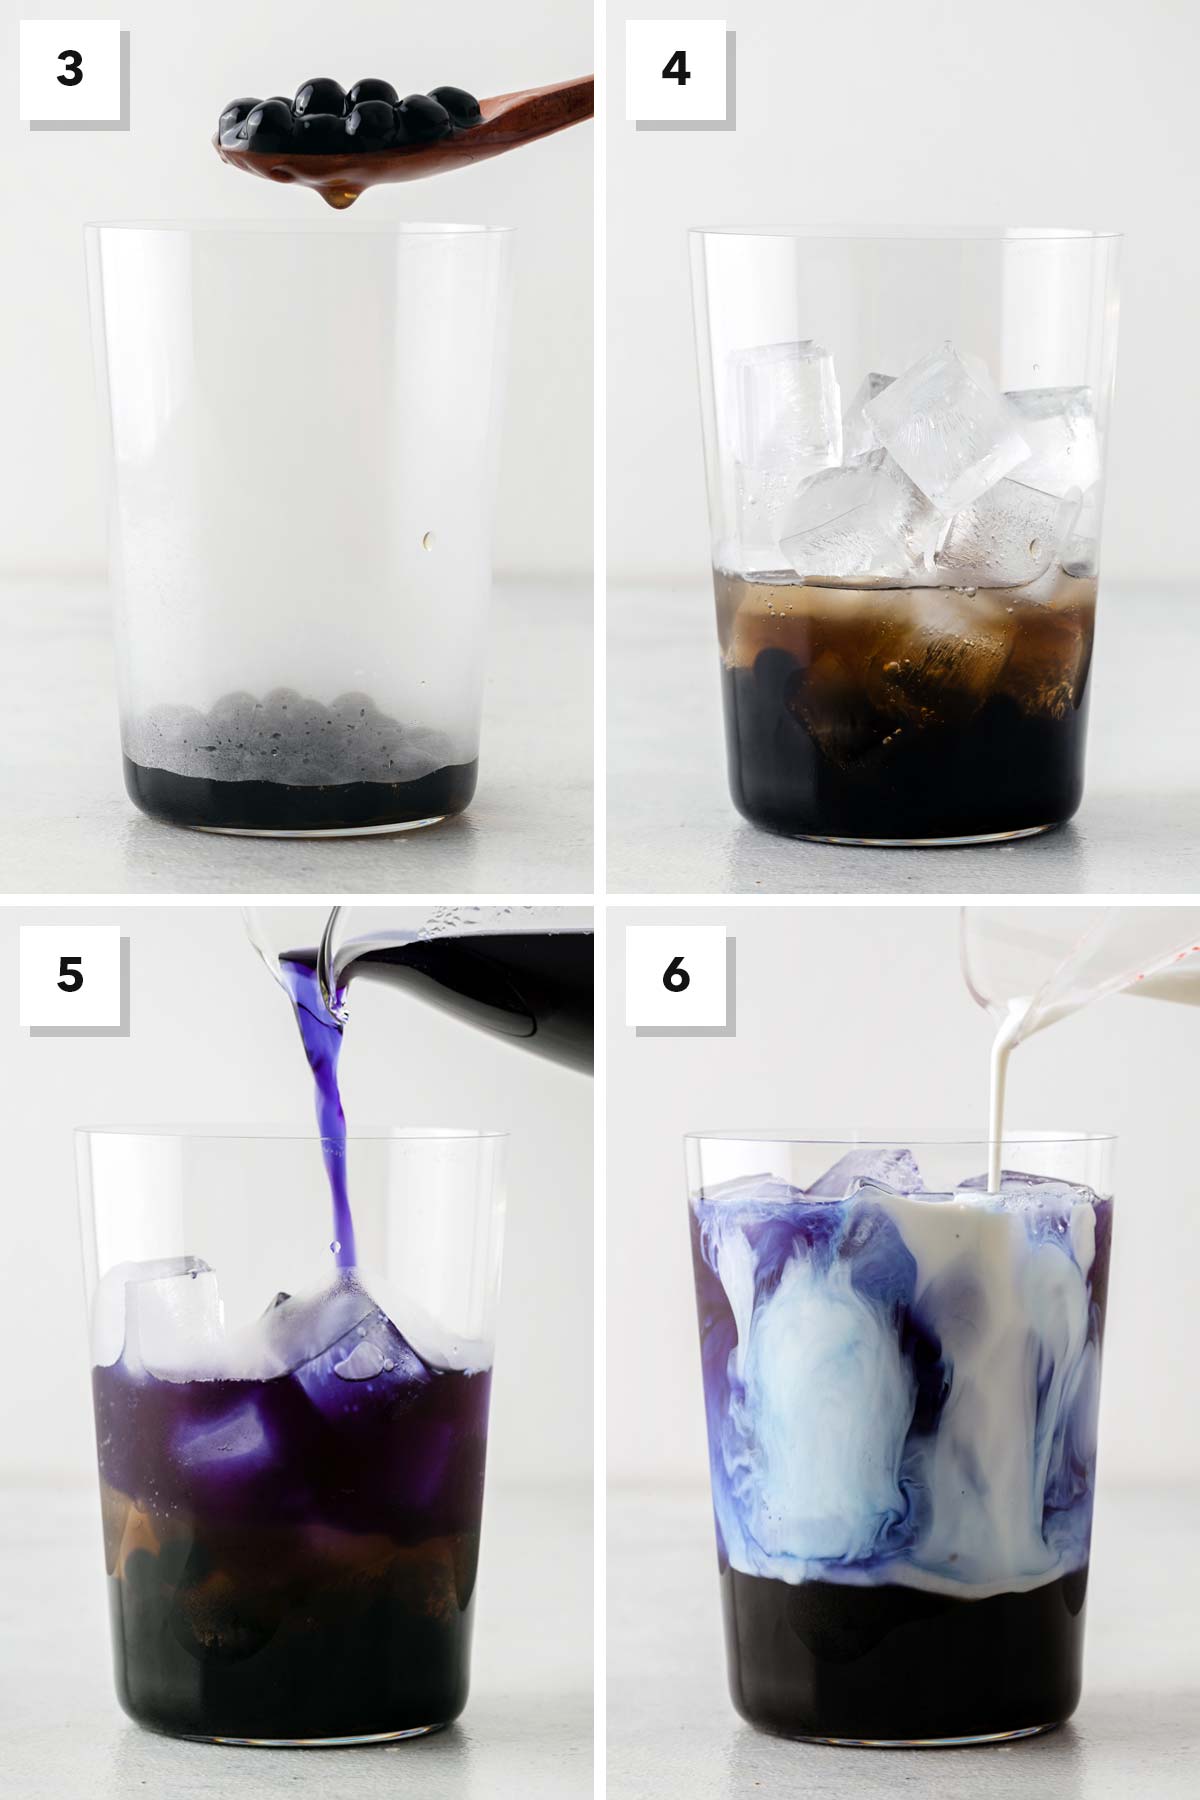 Butterfly Pea Flower Bubble Tea (Butterfly Pea Flower Milk Tea with Boba) last 4 steps for how to make it.